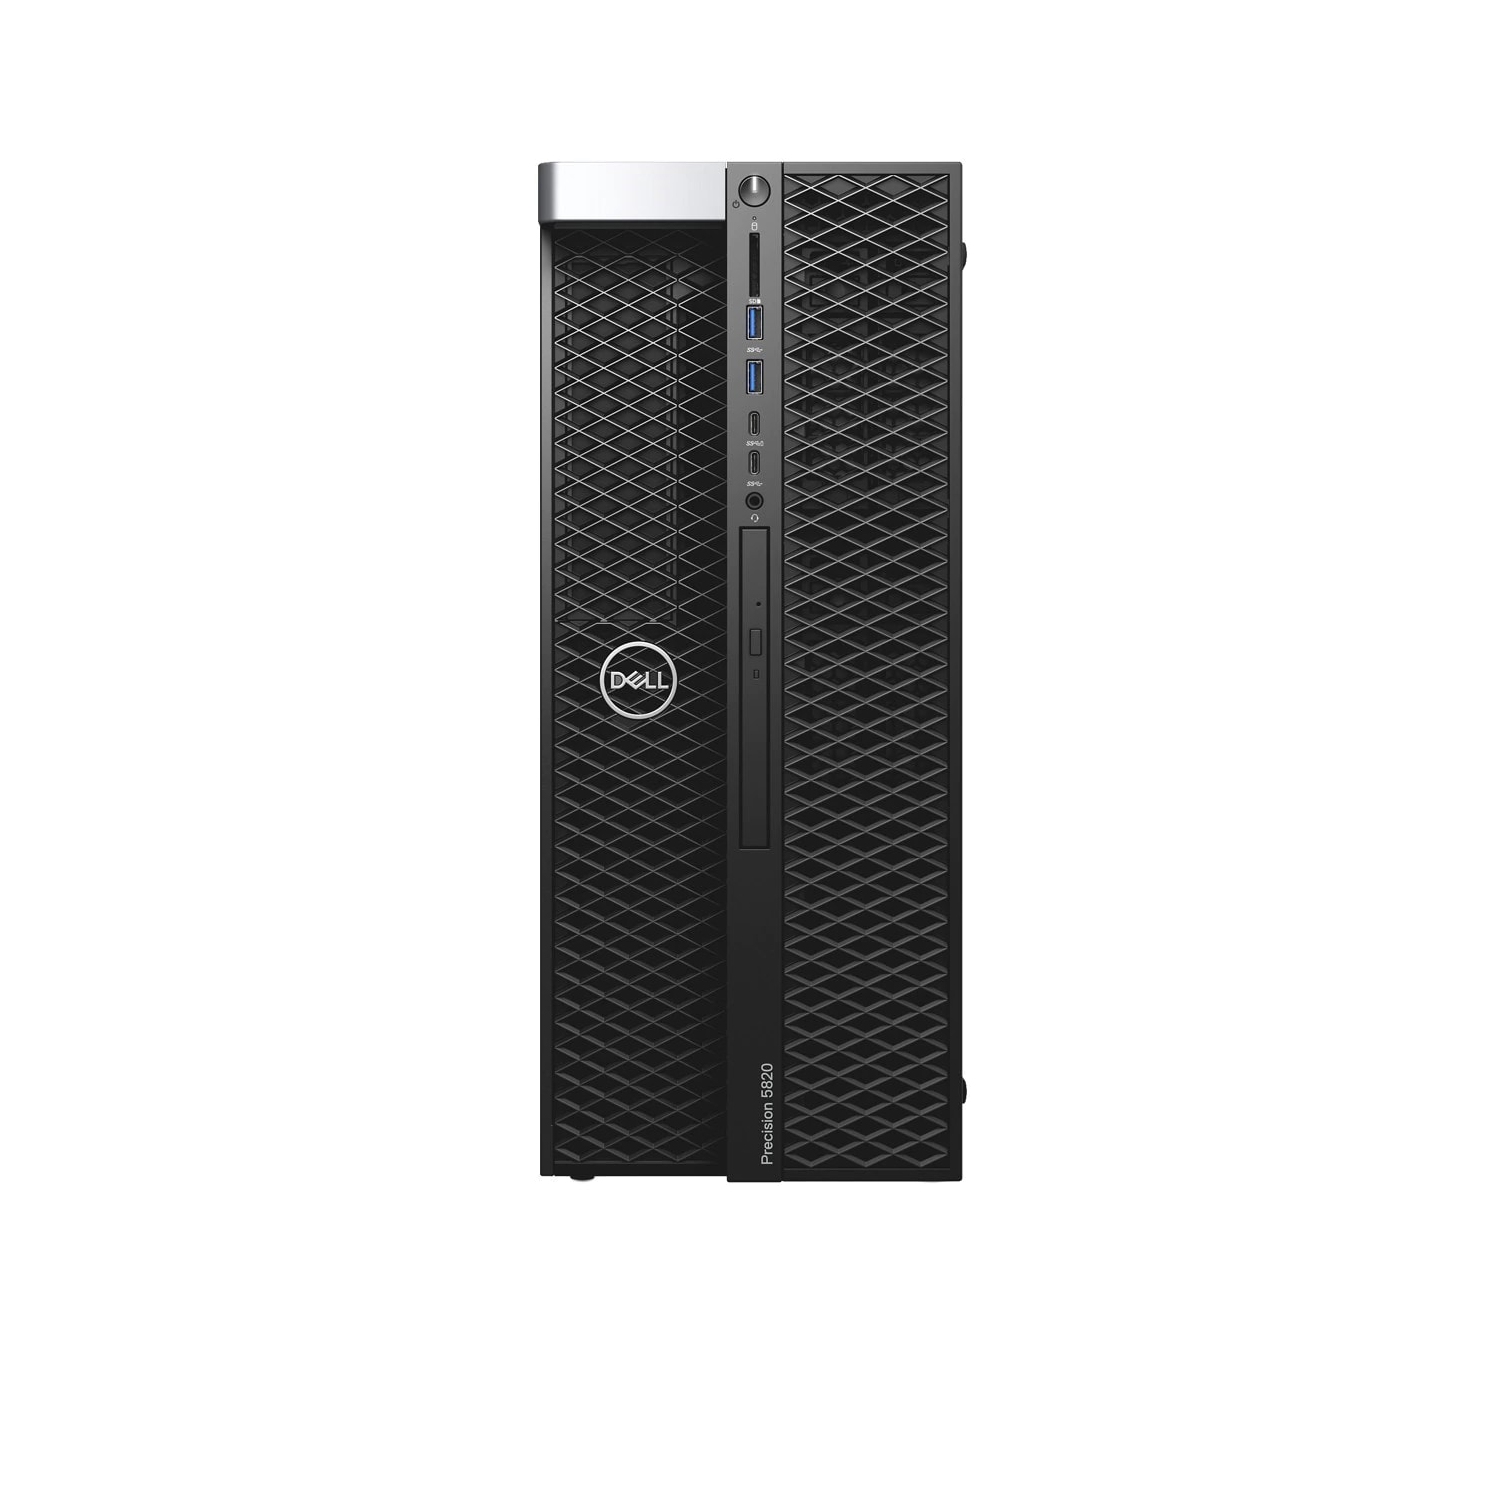 Refurbished (Excellent) - Dell Precision T5820 Workstation Desktop (2018), Core Xeon W, 4TB HDD + 512GB SSD, 64GB RAM, RTX 4000, 10 Cores @ 4.5 GHz Certified Refurbished